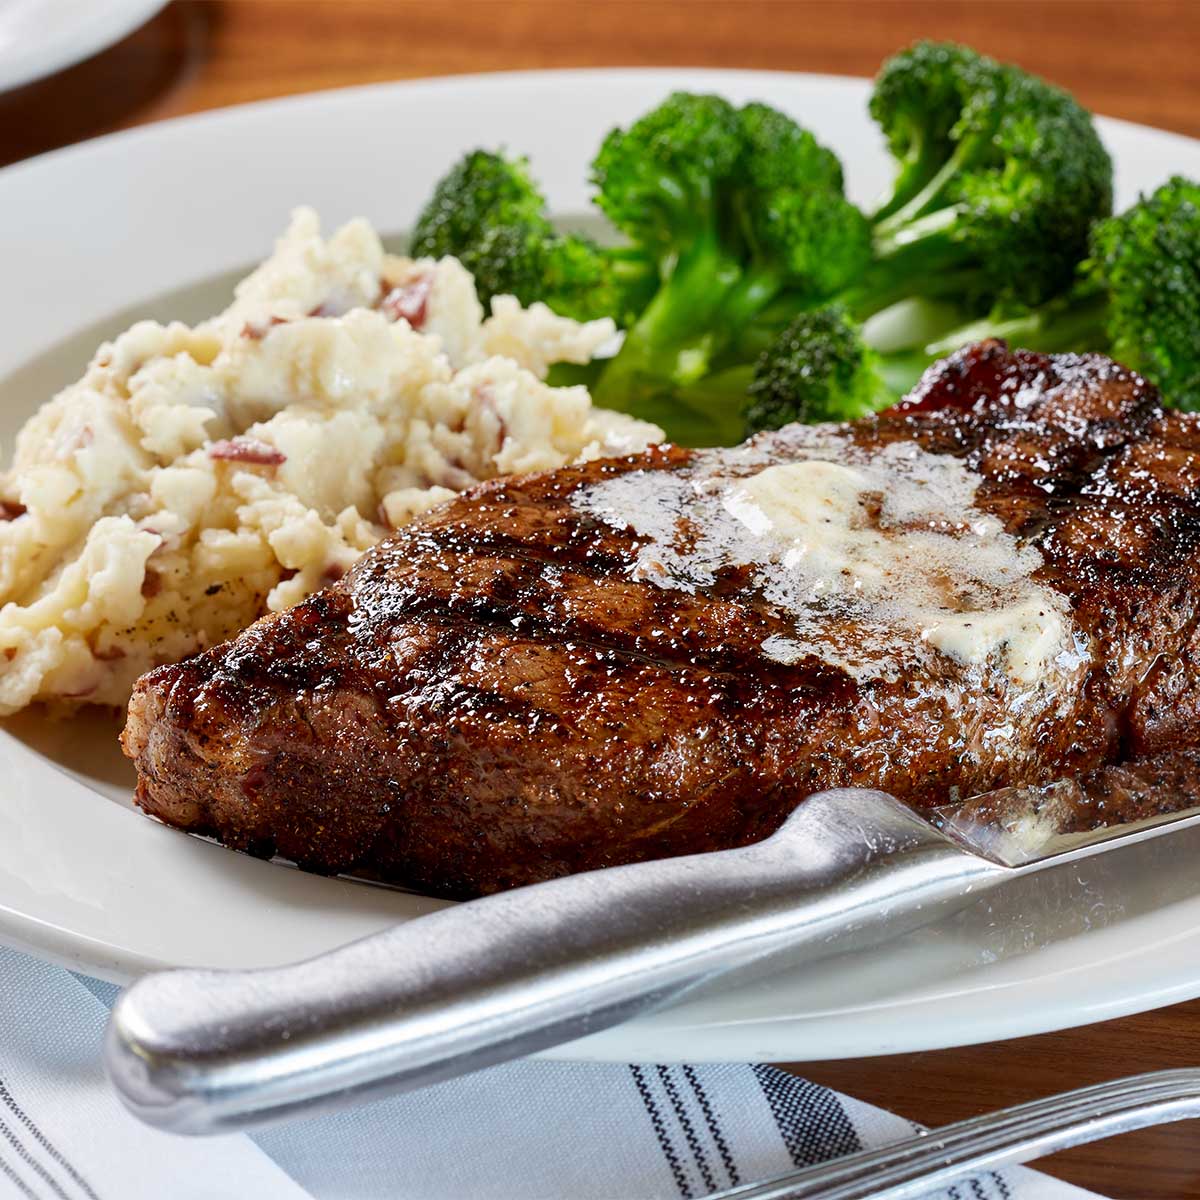 New York strip steak with mashed potatoes and broccoli at Burtons Charlotte location